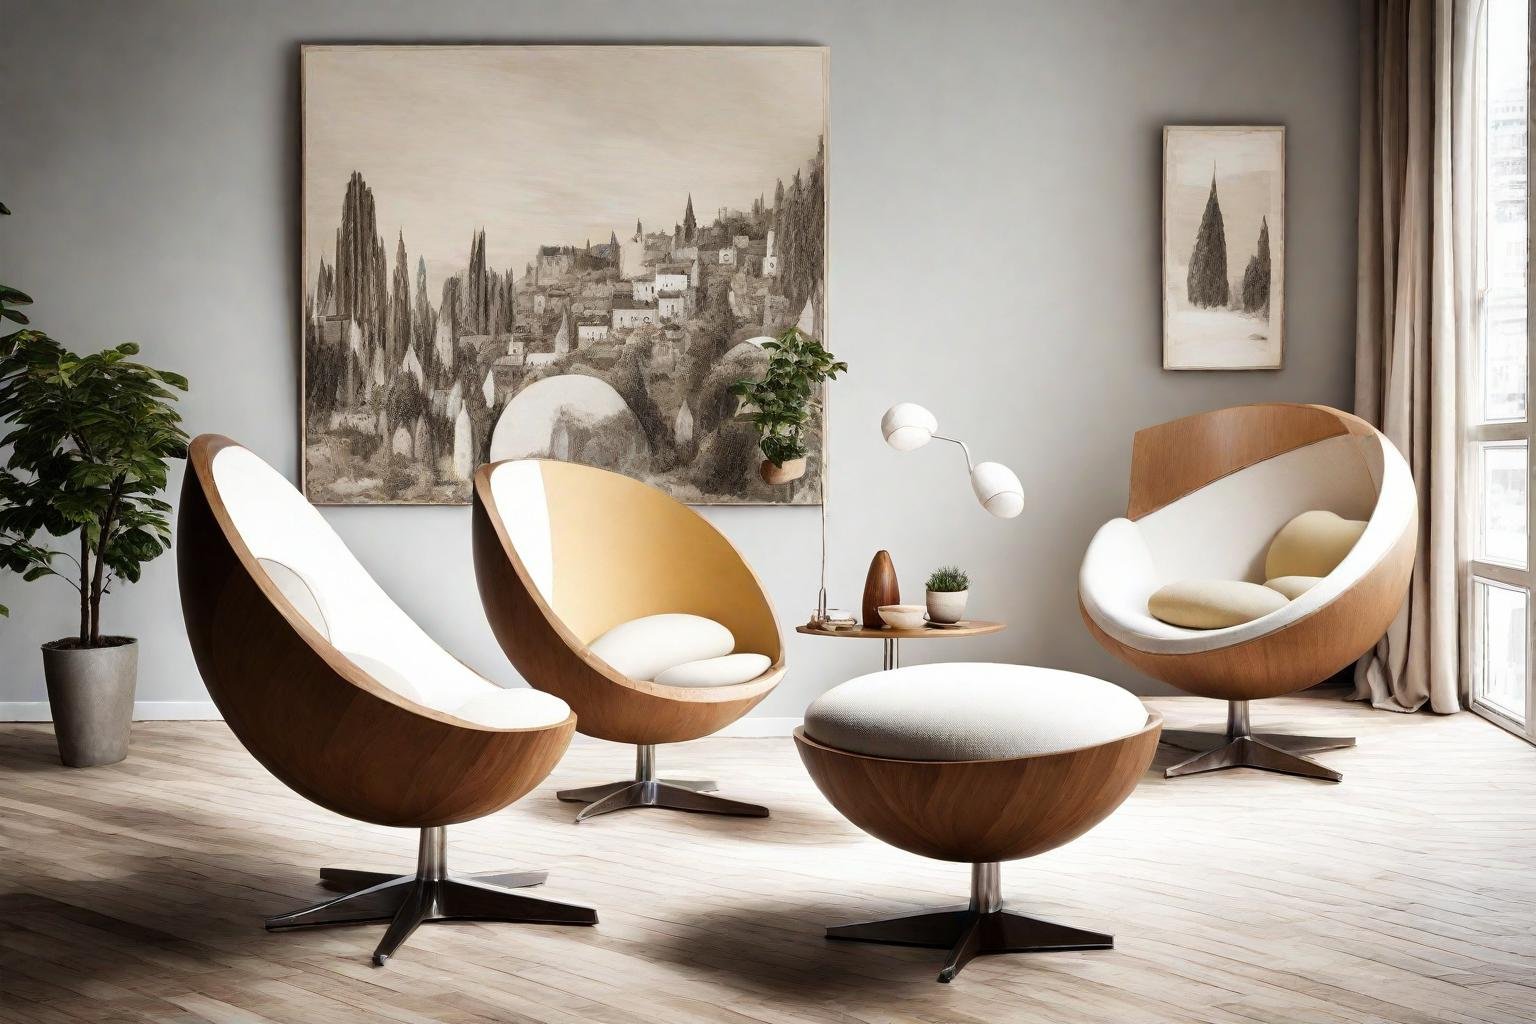 Exploring The World of Egg Chairs